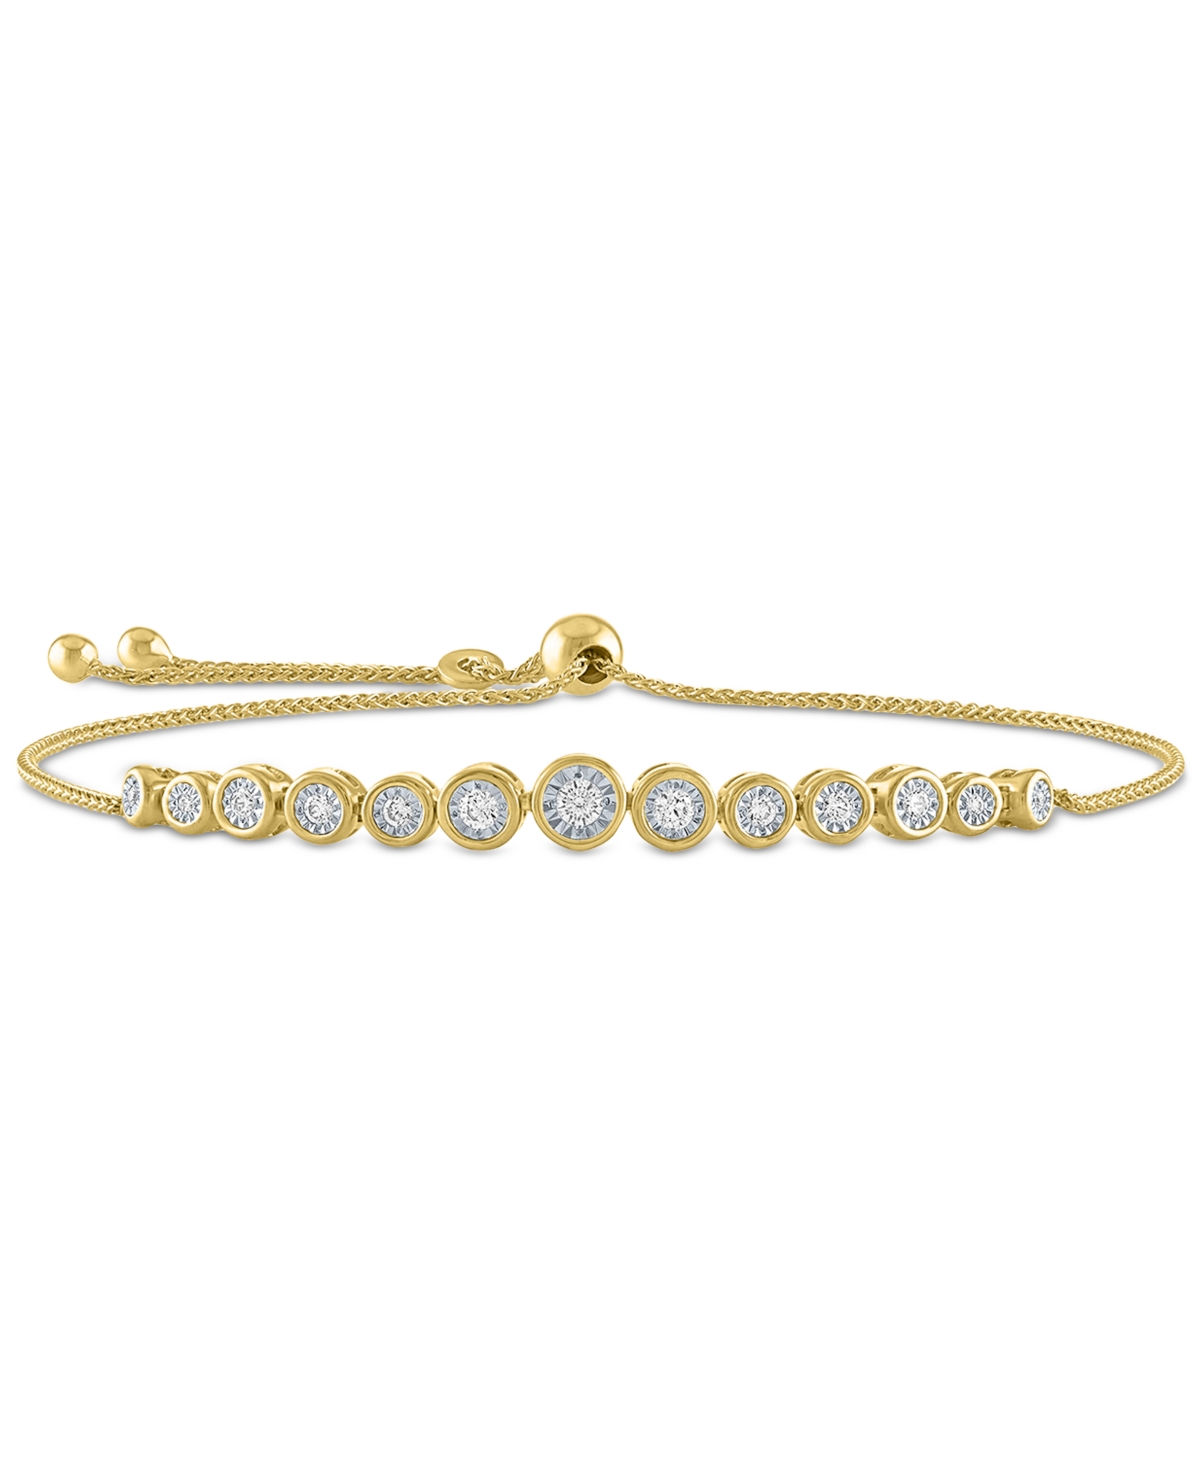 Lab-Created Diamond Graduated Bolo Bracelet (1/5 ct. t.w.) in 14k Gold-Plated Sterling Silver - Gold-Plated Sterling Silver